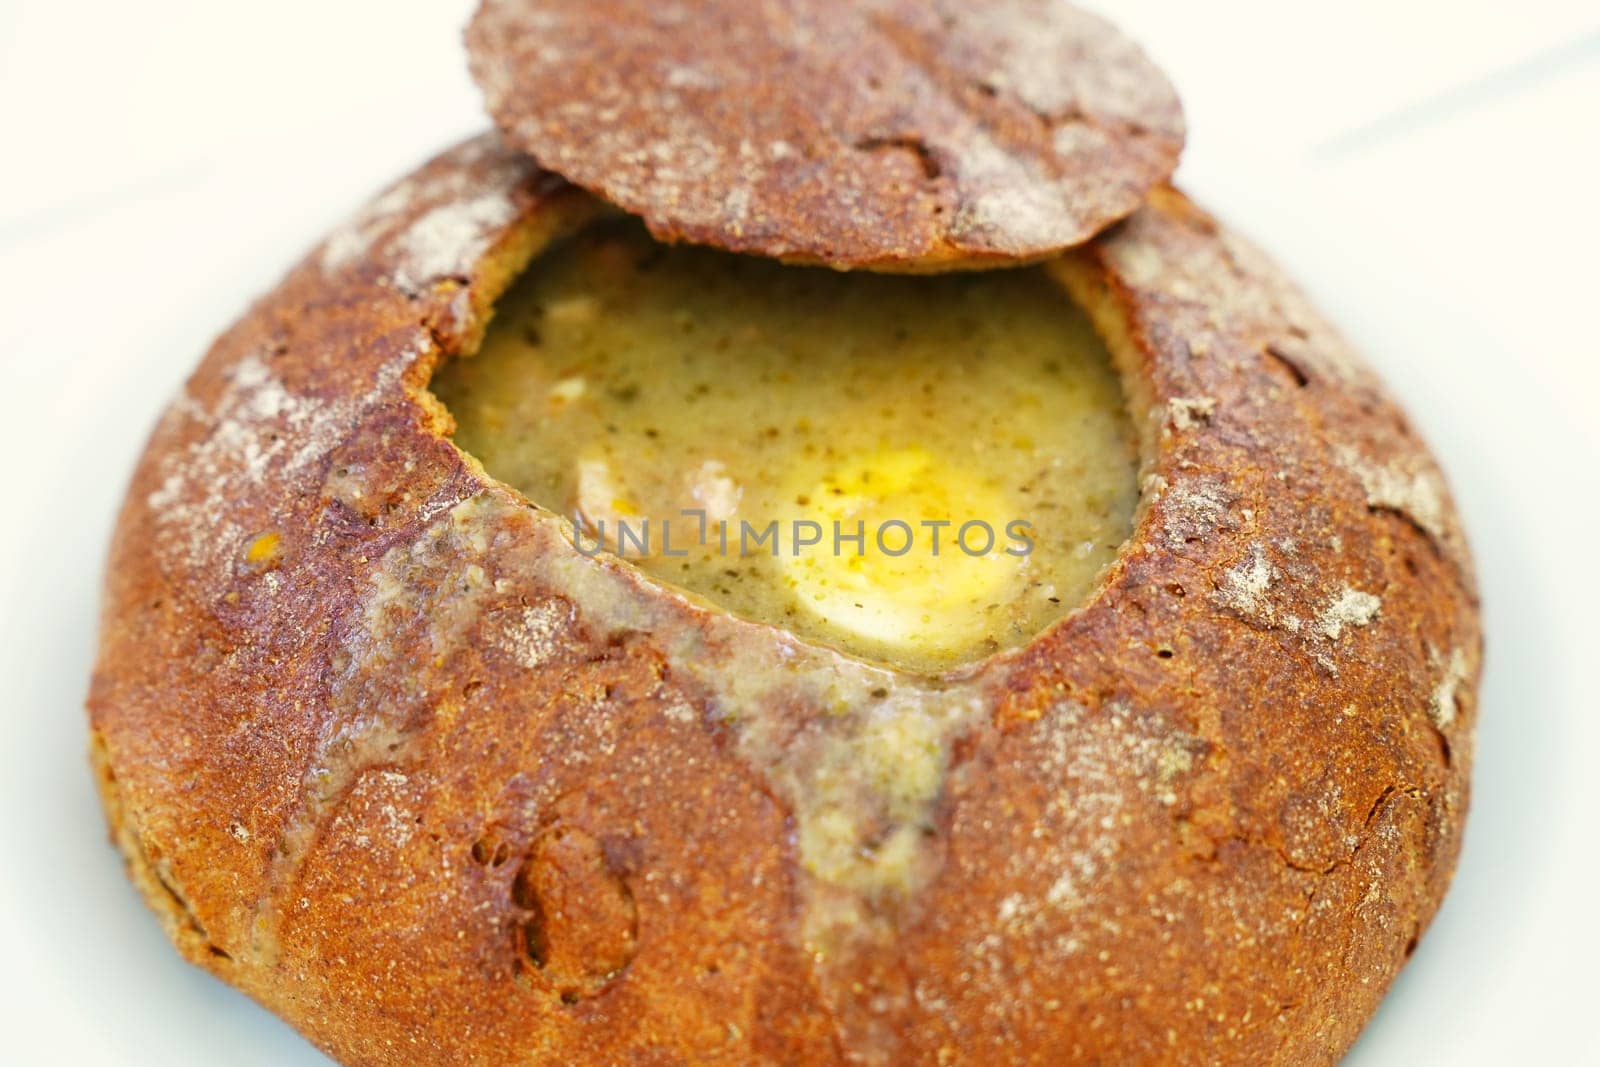 A traditional Polish national dish, a delicious soup served in a freshly baked bread loaf, creating a mouth-watering and visually appealing culinary experience.